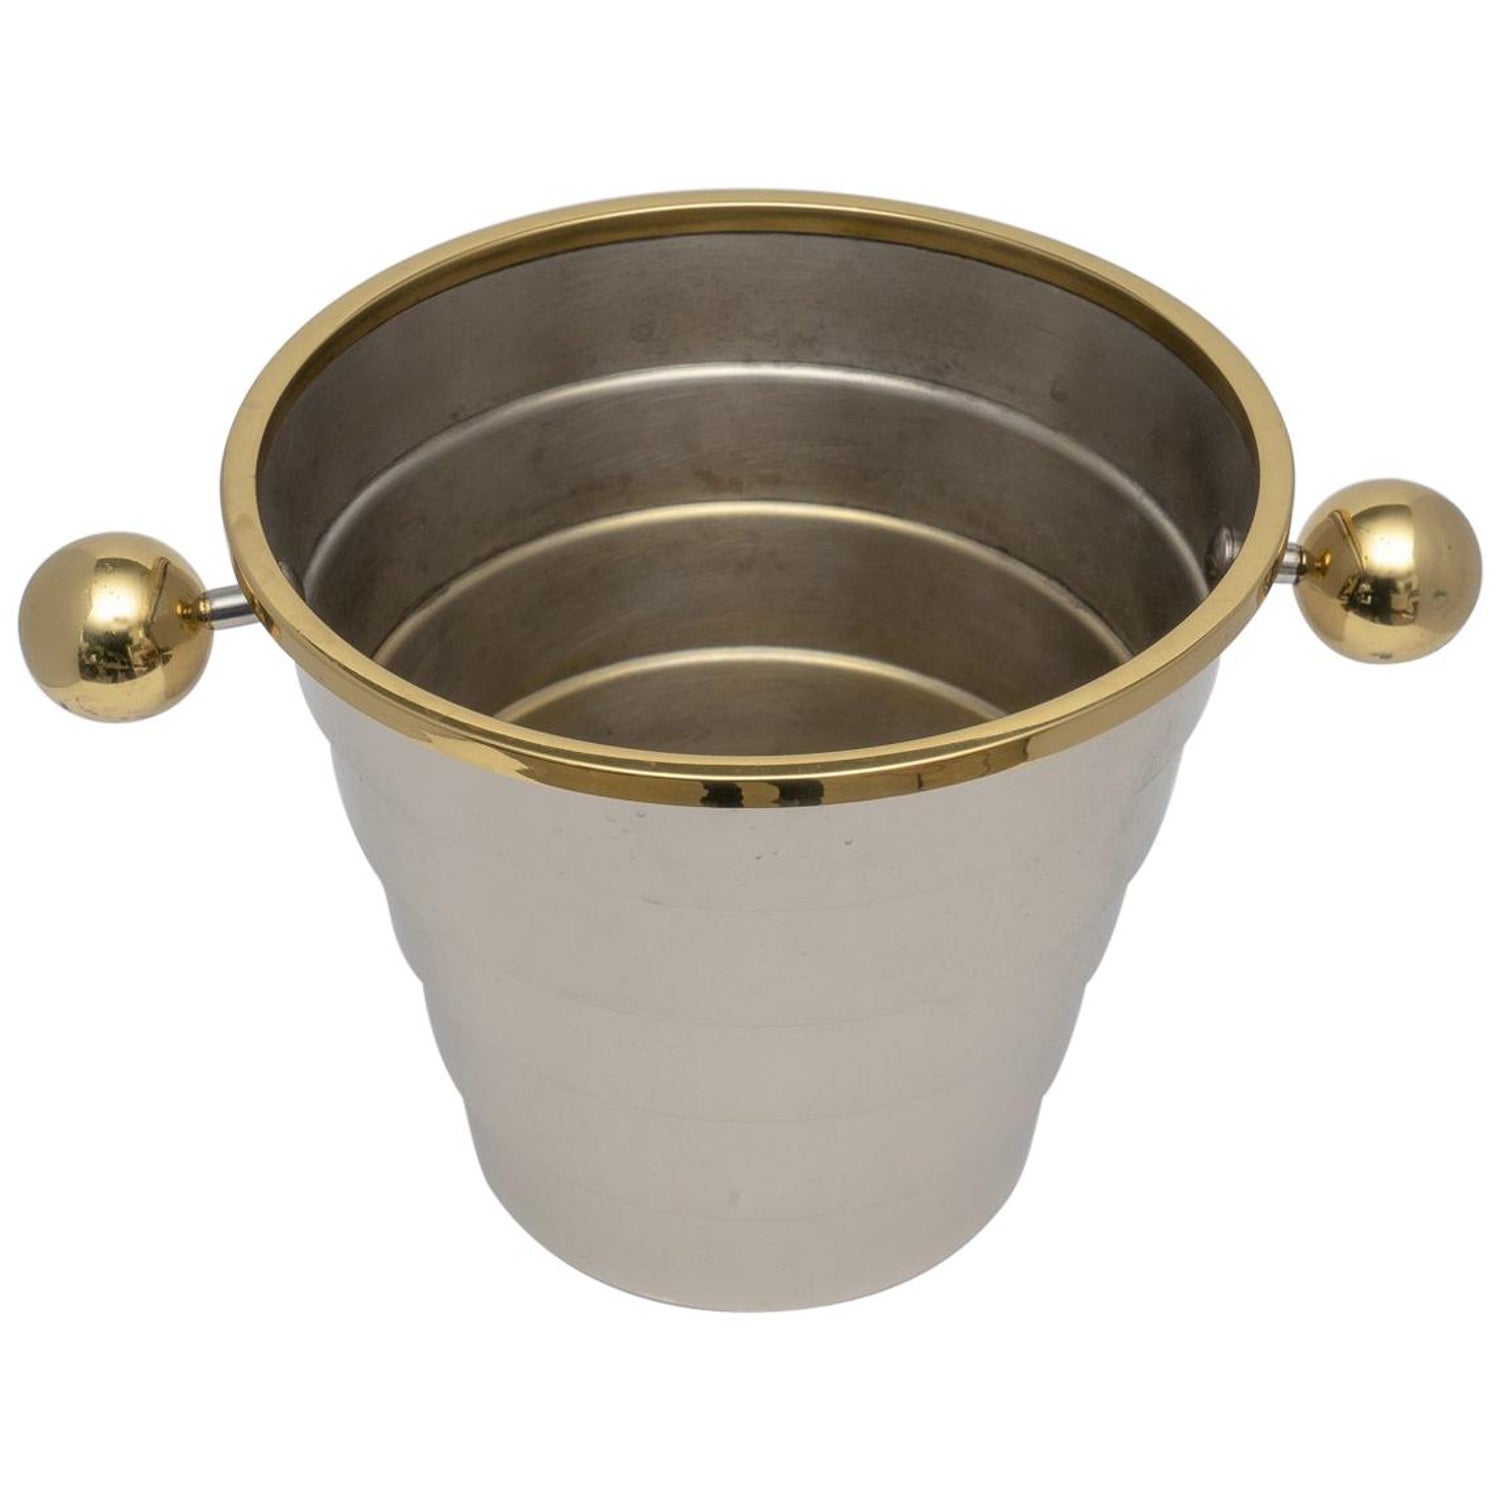 Champagne Bucket by Larry Laslo For Sale at 1stDibs